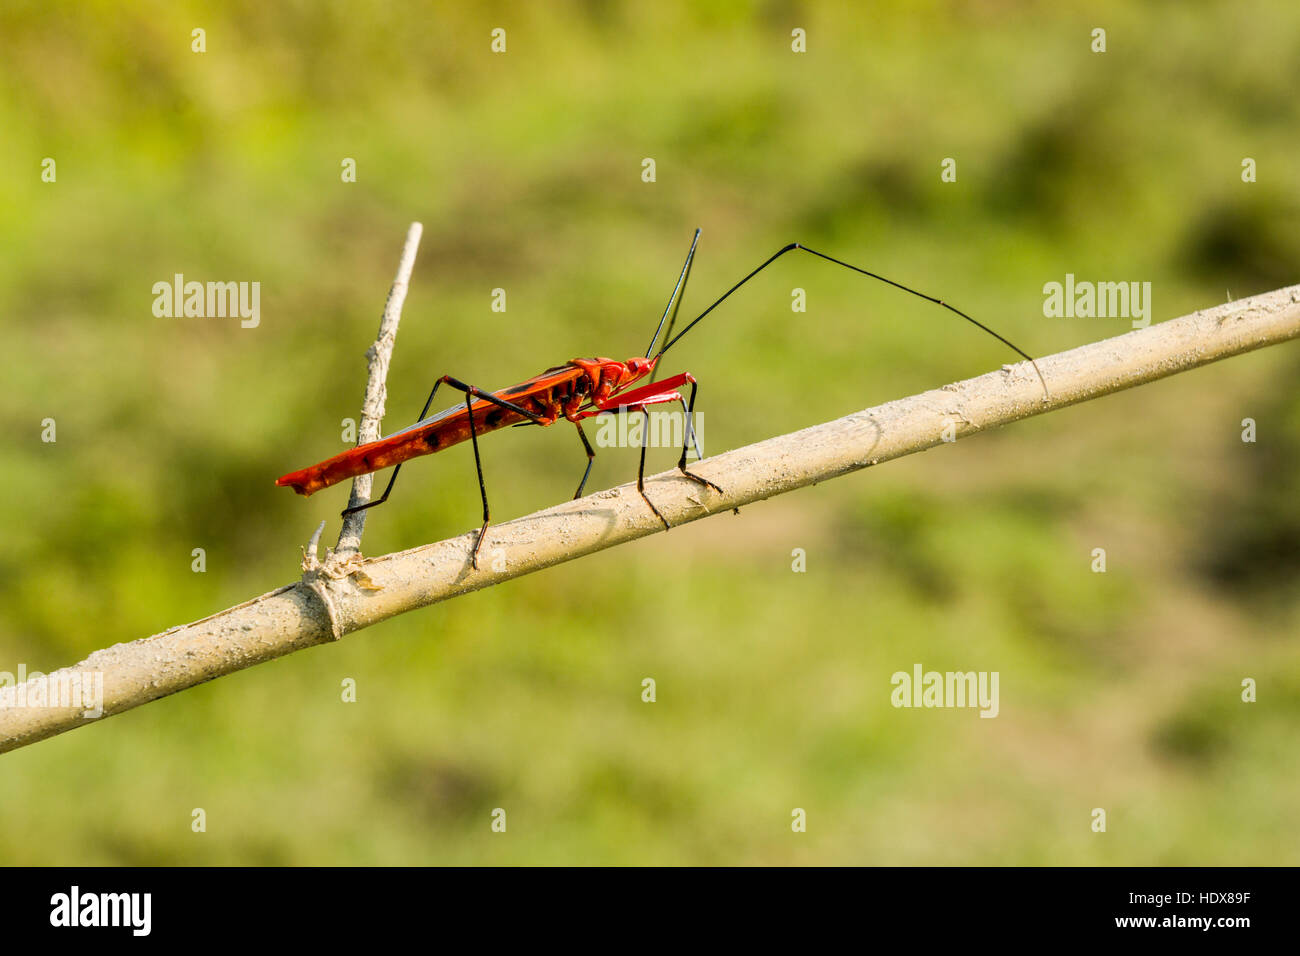 A Red Cotton Bug (Dysdercus cingulatus) is sitting on a dry branch of a tree Stock Photo